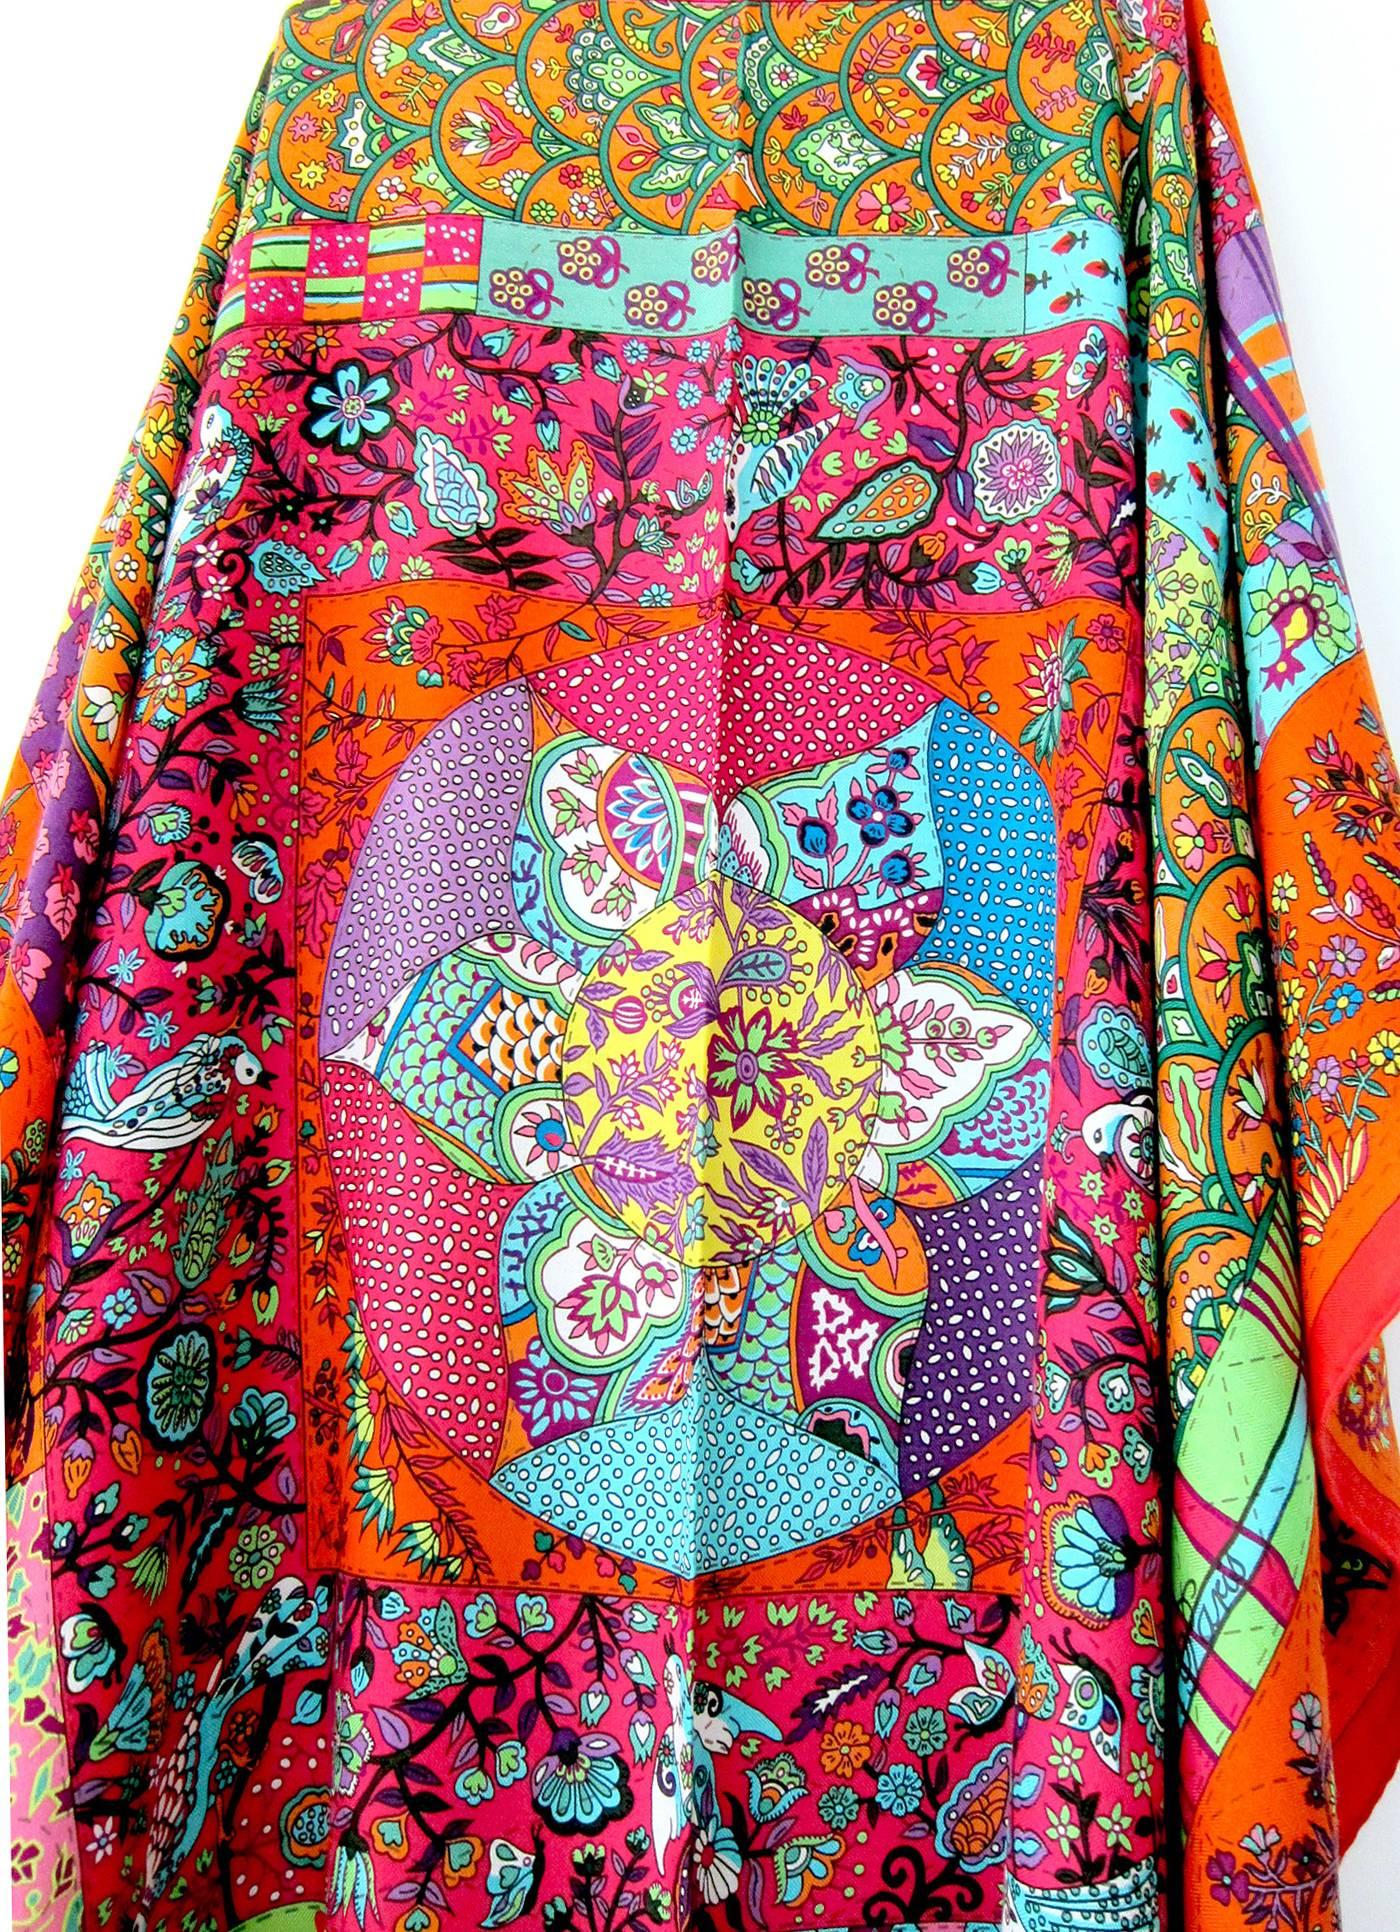 Hermes Pique Fleuri de Provence Cashmere Silk Shawl Rouge Orange Turquoise Scarf
Store fresh.  Pristine condition.
Perfect gift!  Comes with signature Hermes box.
Sold out of stores for a long time.
Simply gorgeous!
Final sale.
Giant GM square